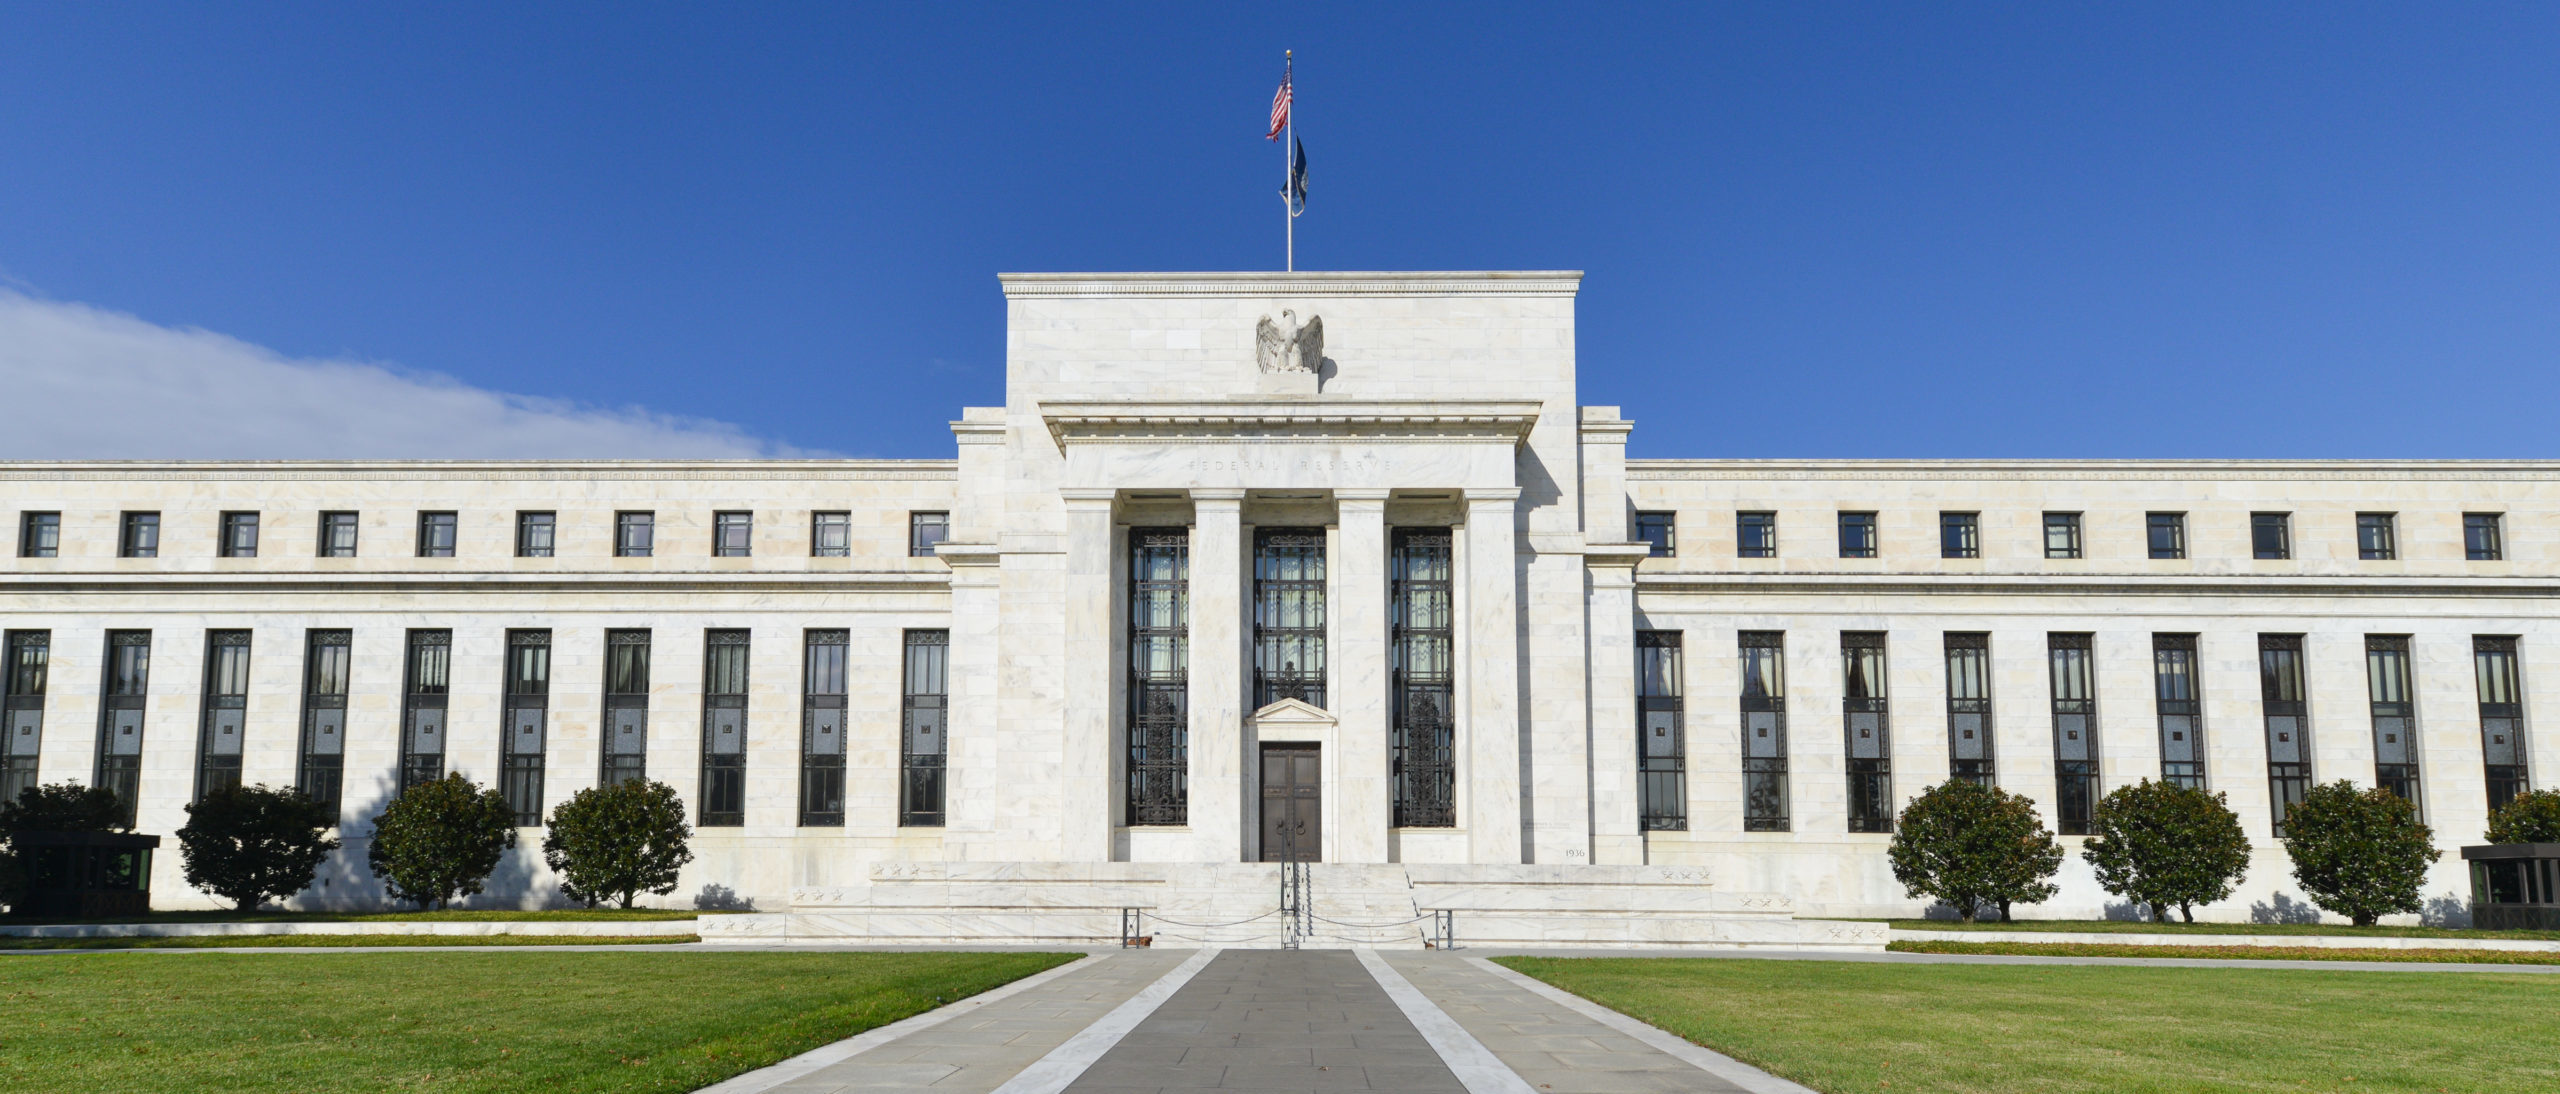 Federal Reserve Announces Next Step Toward Possibility Of Official U.S. Digital Currency